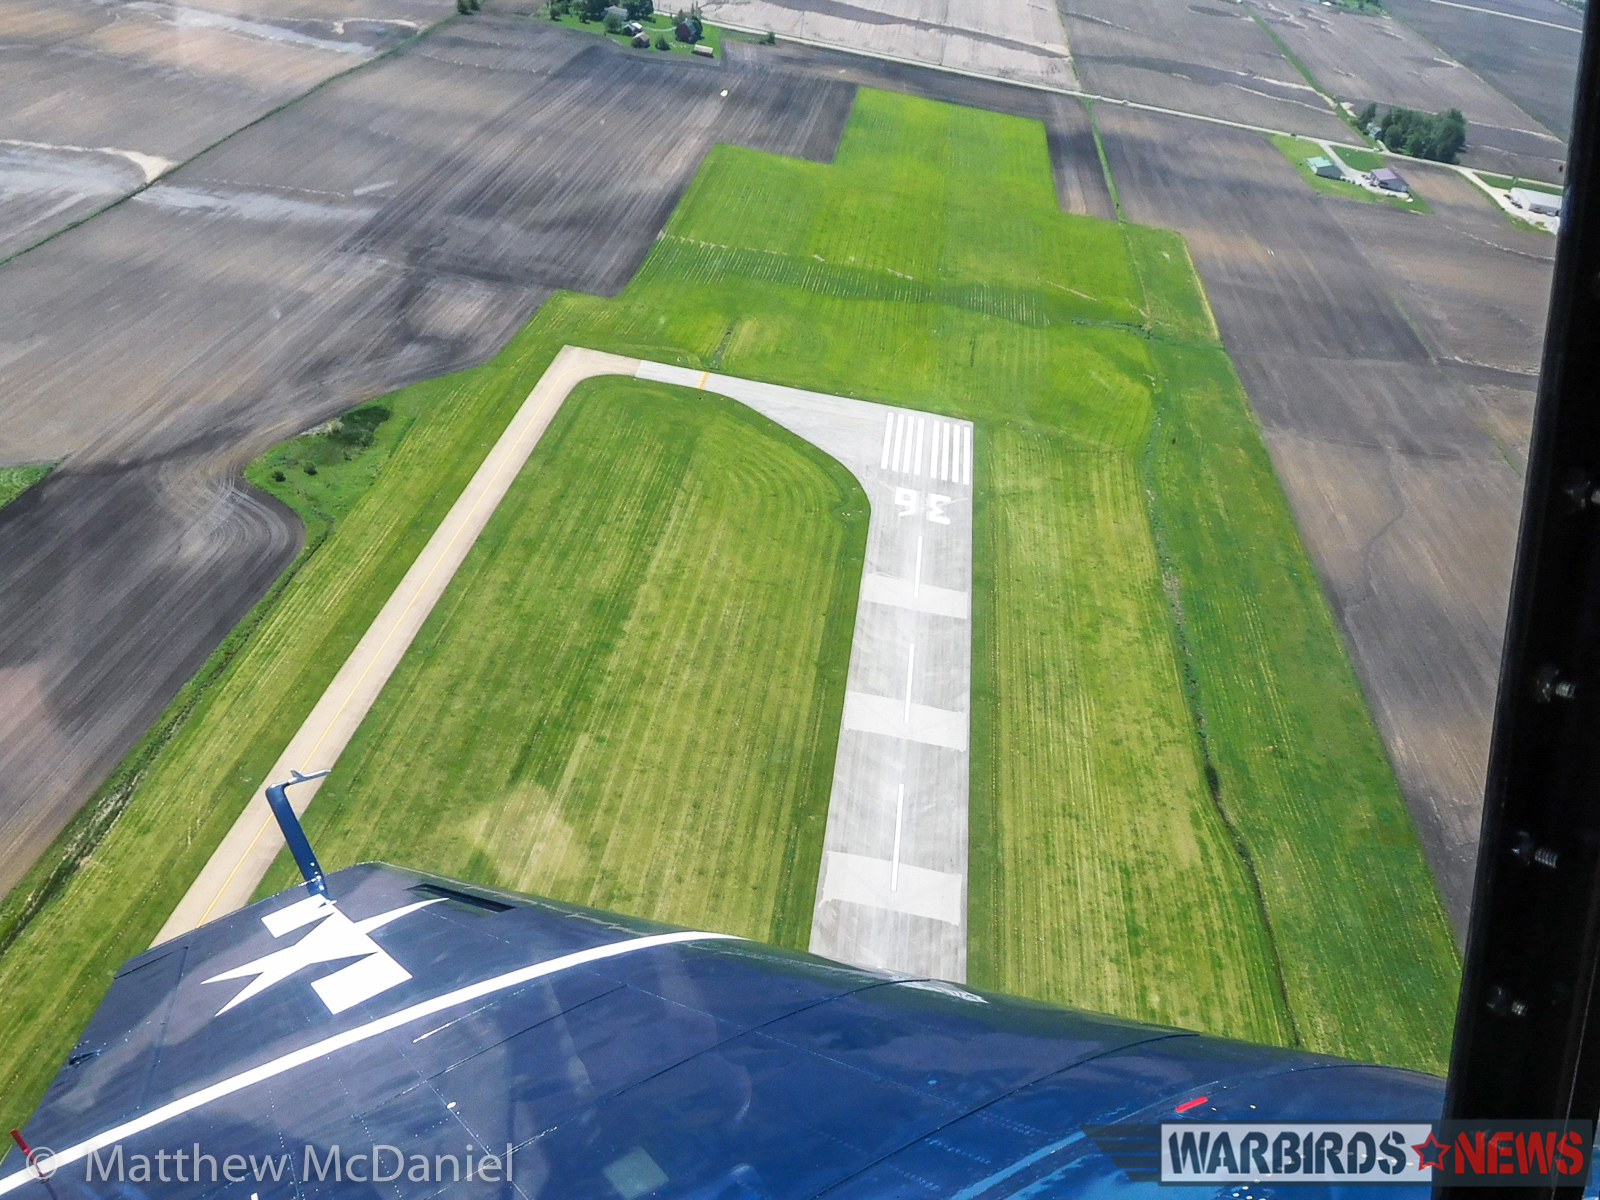 Looking down at the approach end of VYS's runway 36, during a left overhead break for landing on Runway 25. (Photo by Matthew McDaniel)